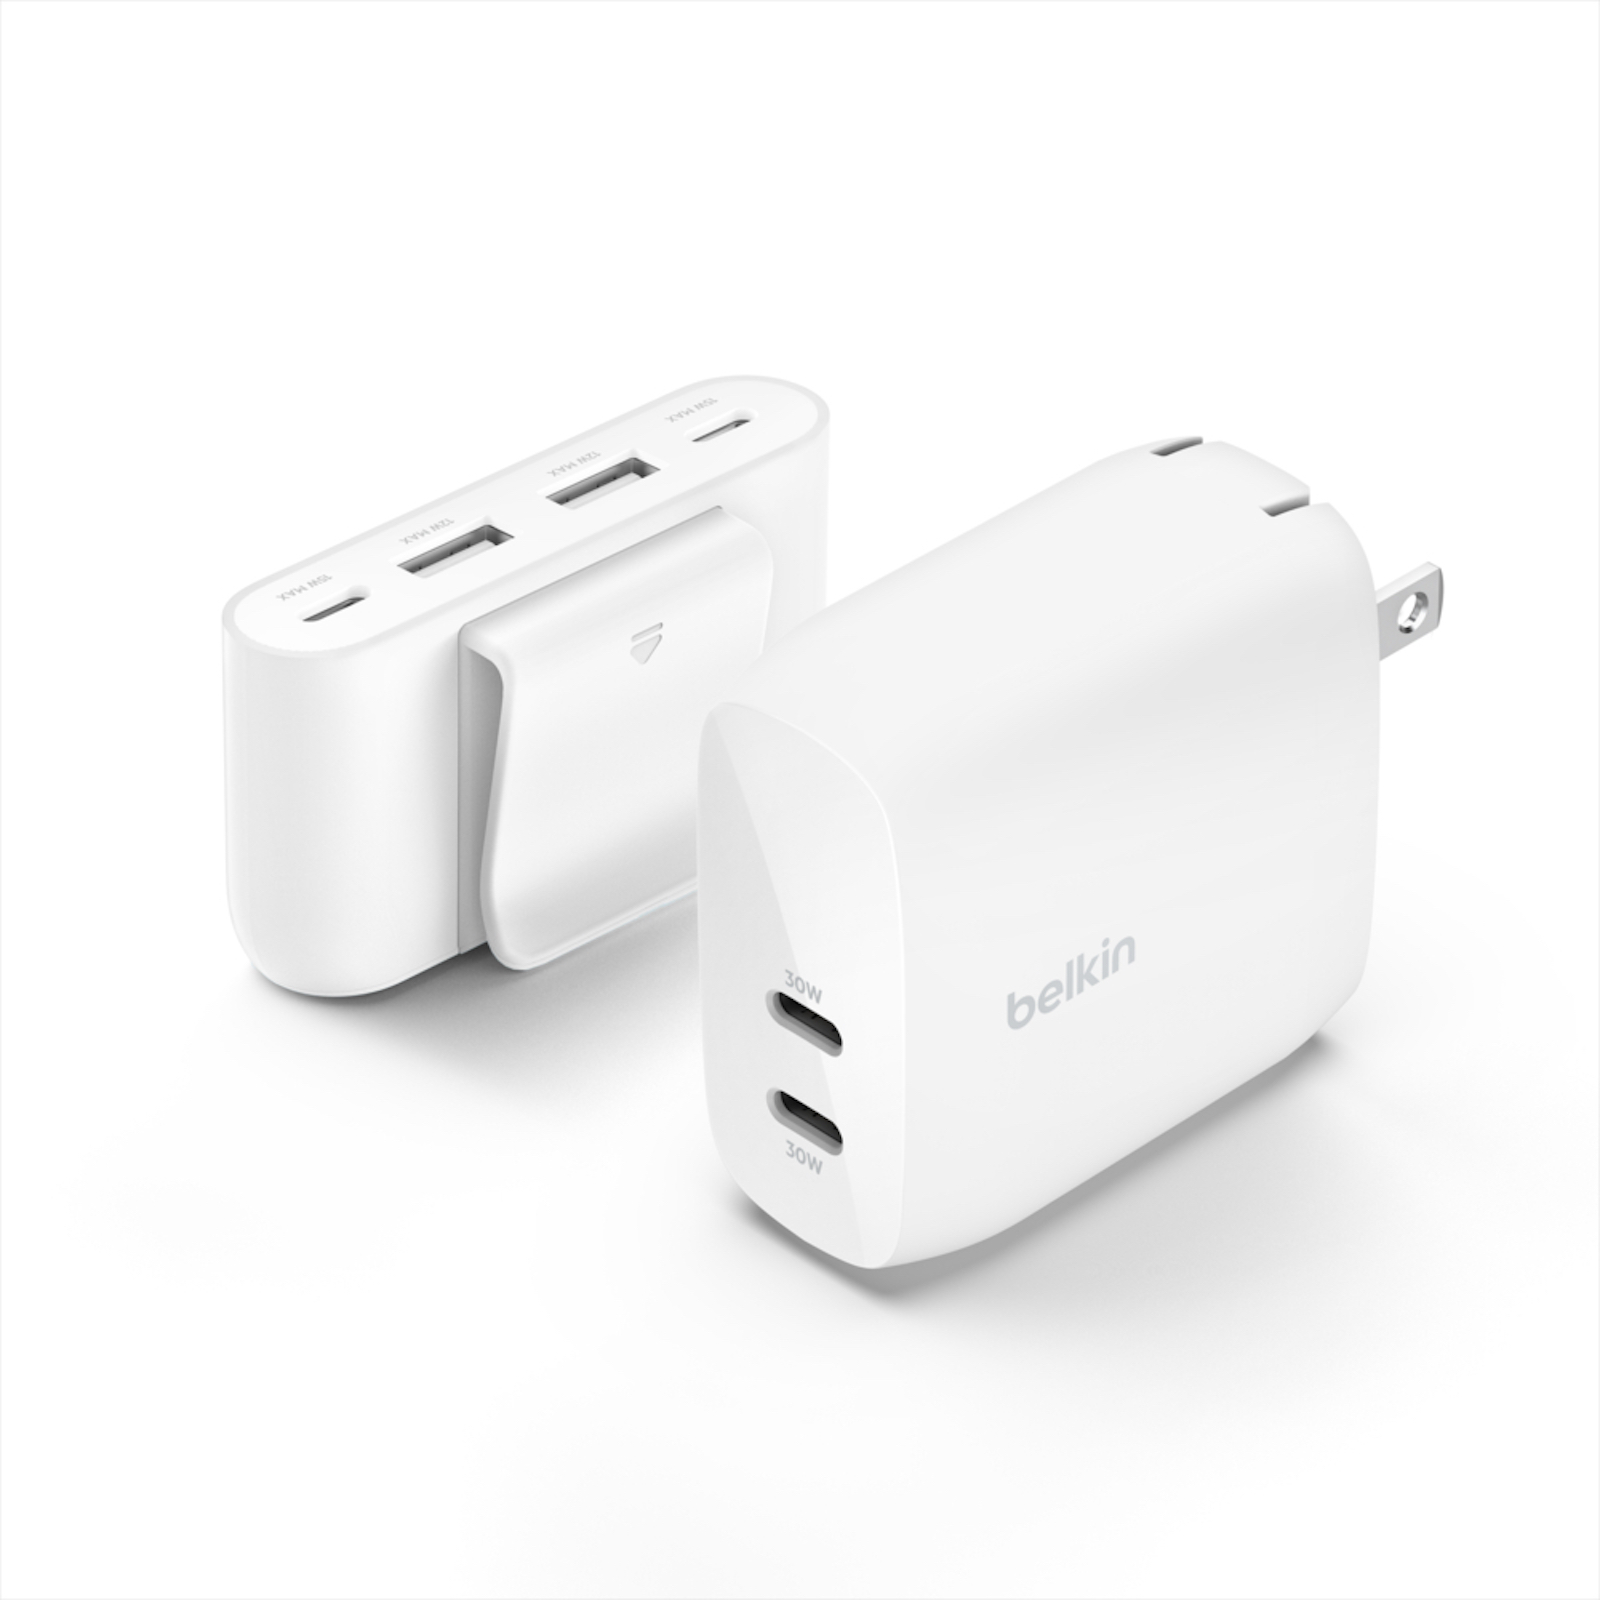 Belkin 4port power extender and 60w charger